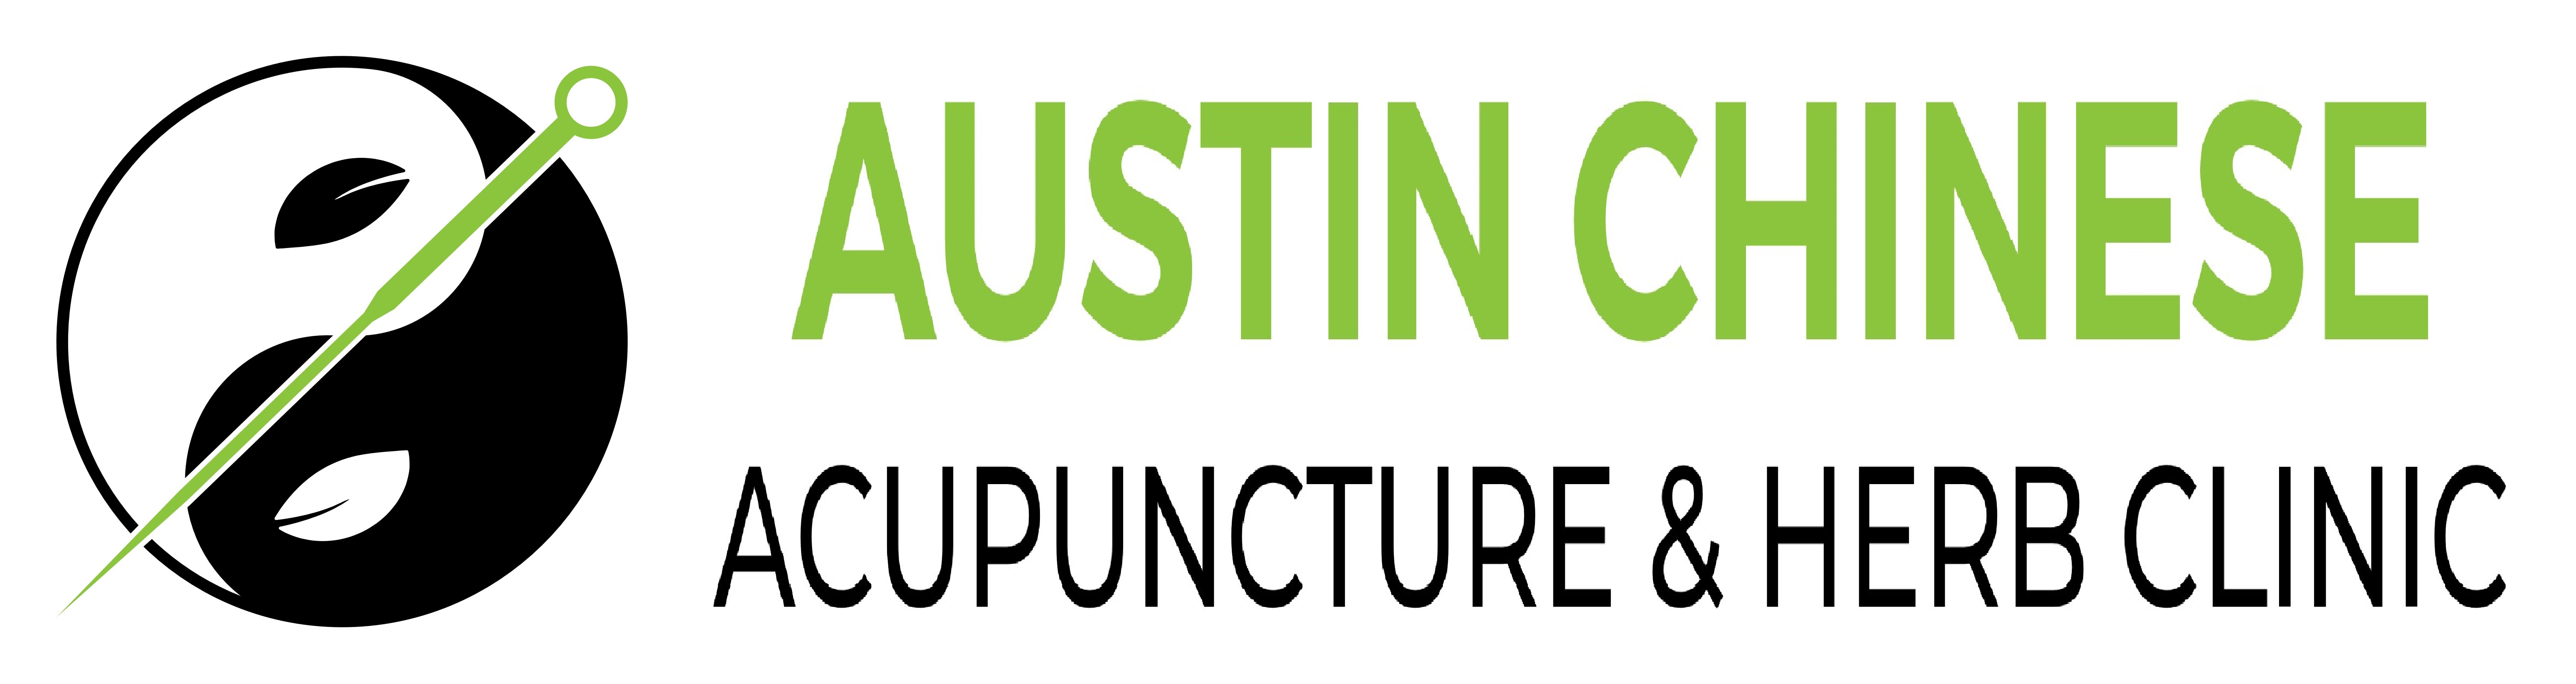 austin chinese acupuncture & herb clinic